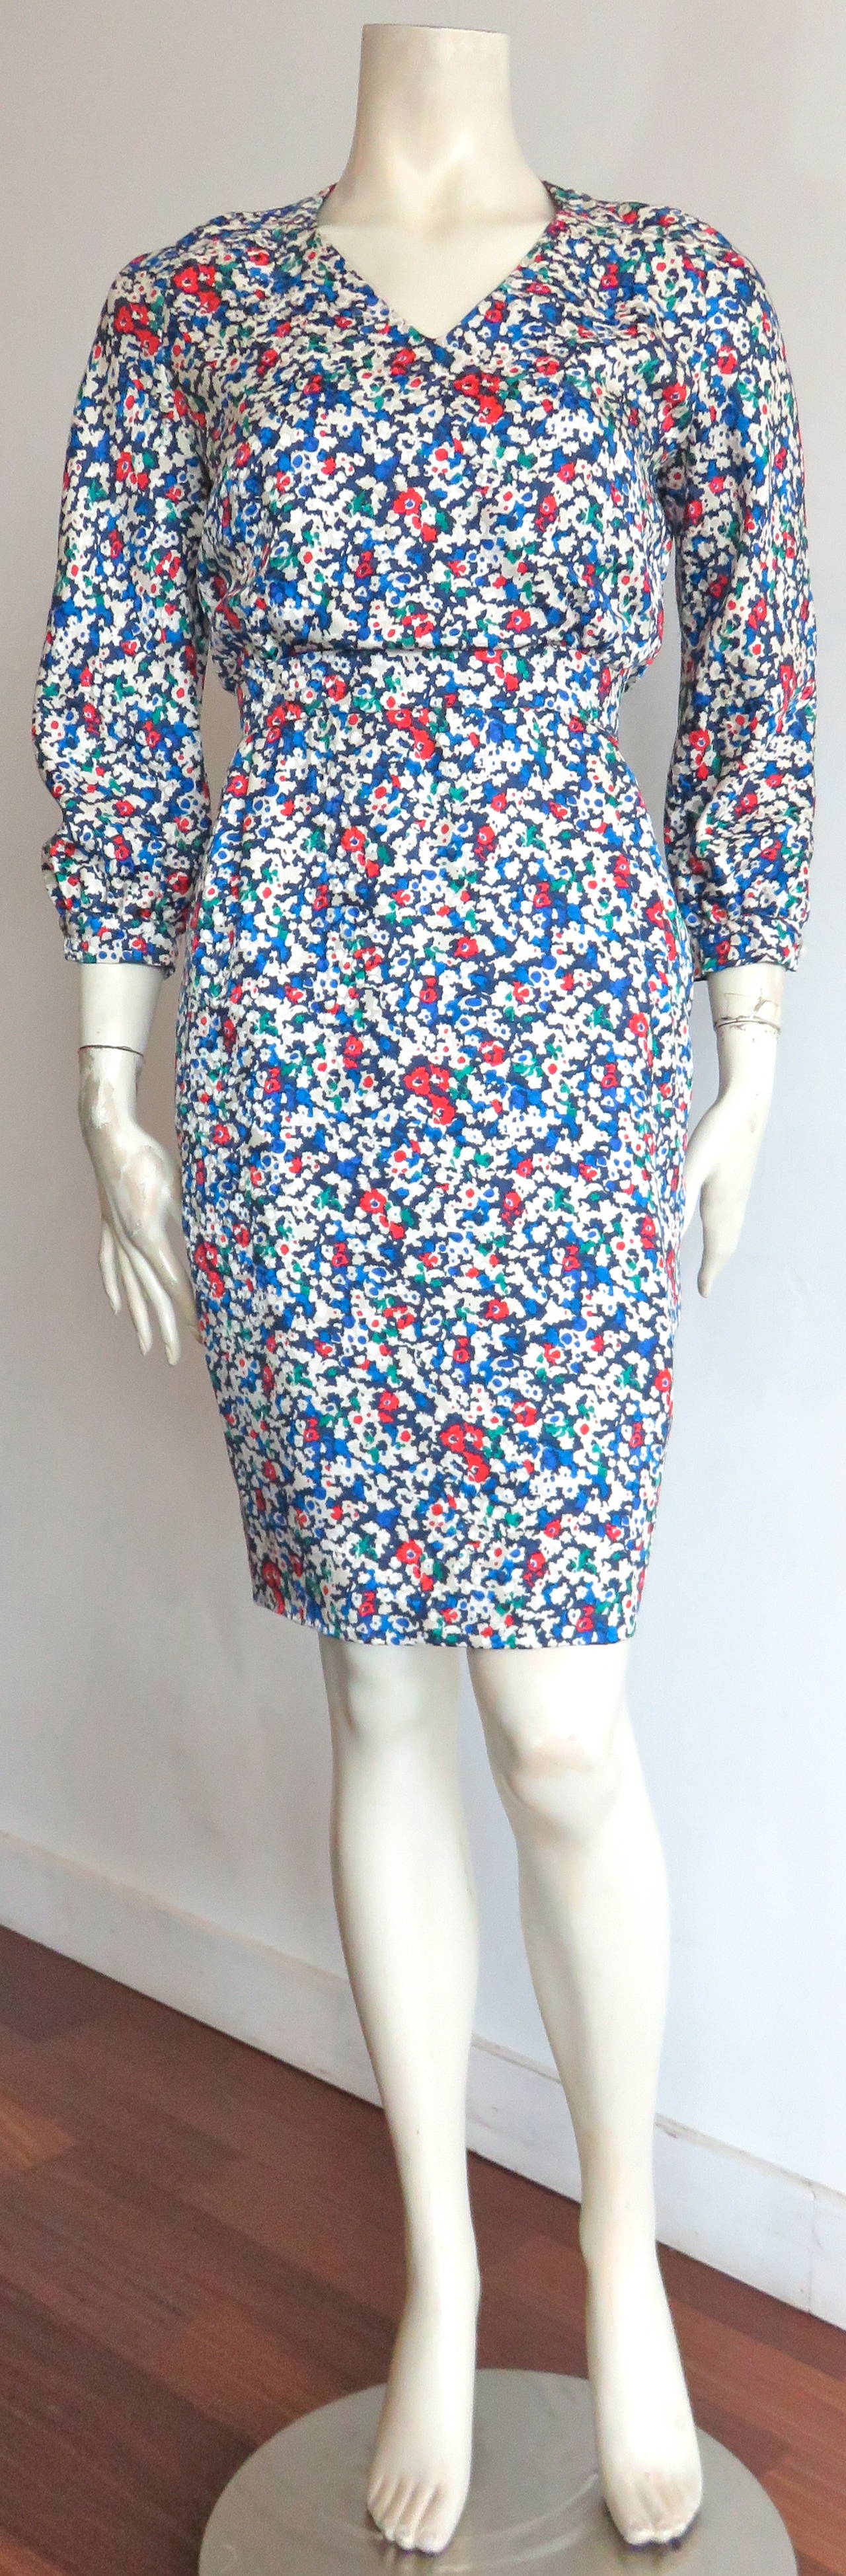 Mint condition, 1980's VALENTINO Silk floral day dress.

Gorgeous, multi-color floral print atop dotted floral silk fabric.

3/4-length, raglan sleeves with large, faux-pearl button closures at cuffs.

'V'-shaped neckline front with concealed,